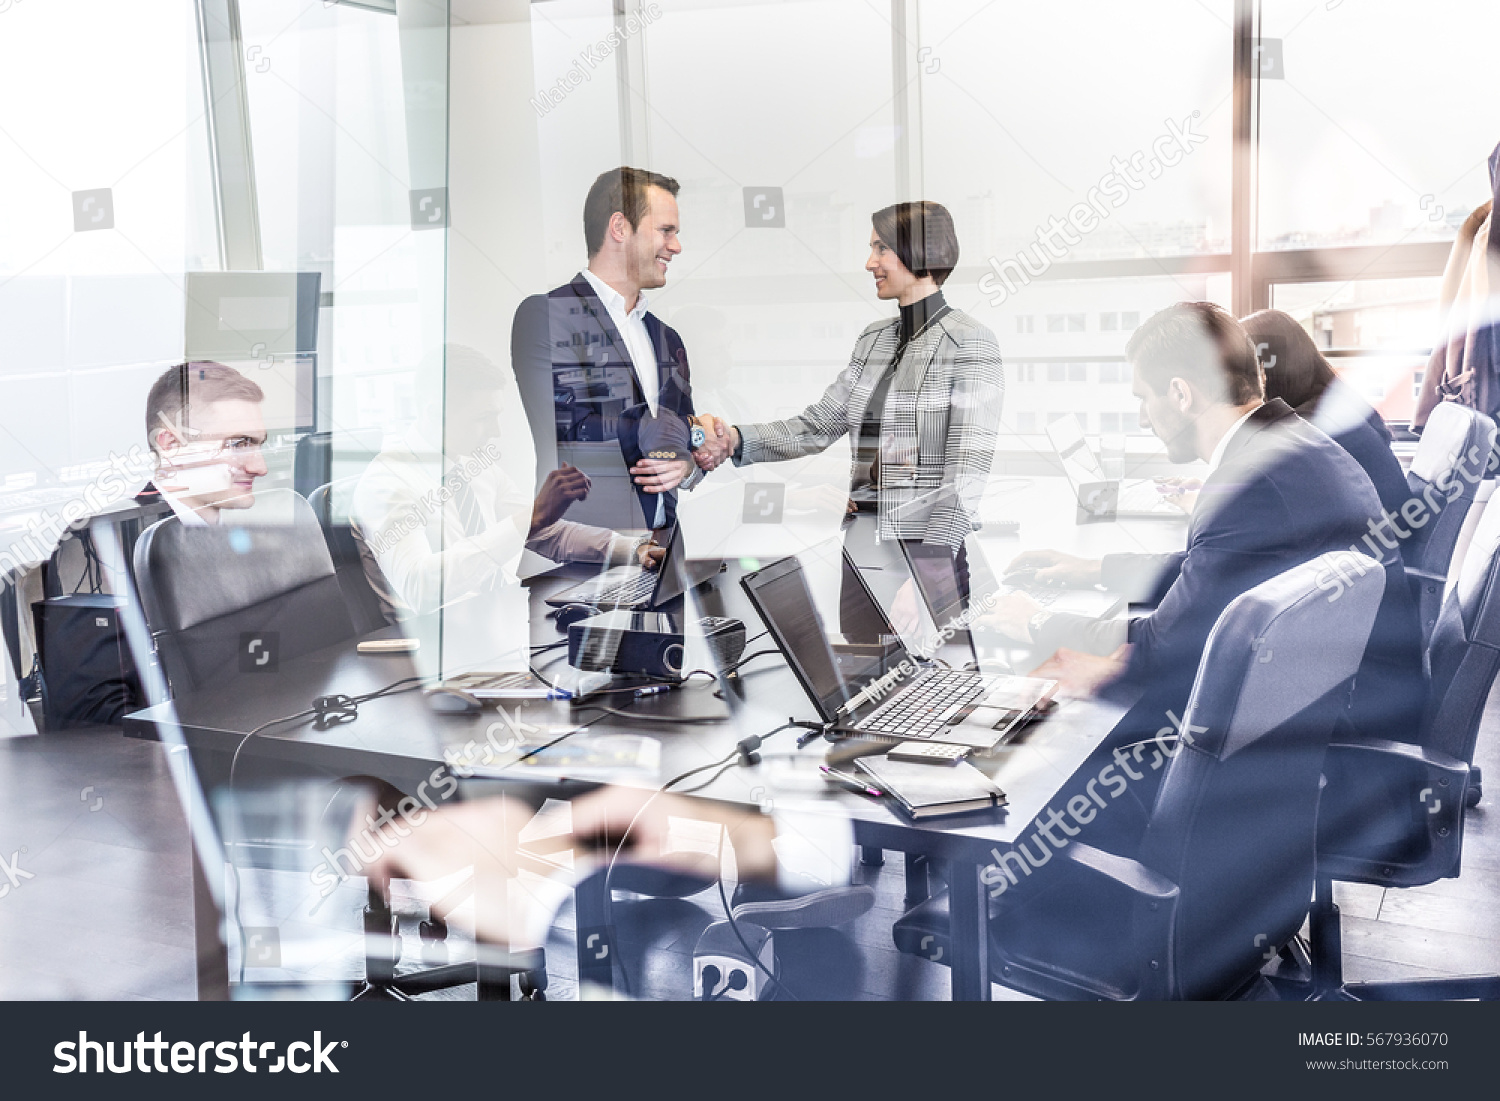 Sealing a deal. Business people shaking hands, finishing up meeting in corporate office. Businessmen working on laptop seen in glass reflection. Business and entrepreneurship concept. #567936070